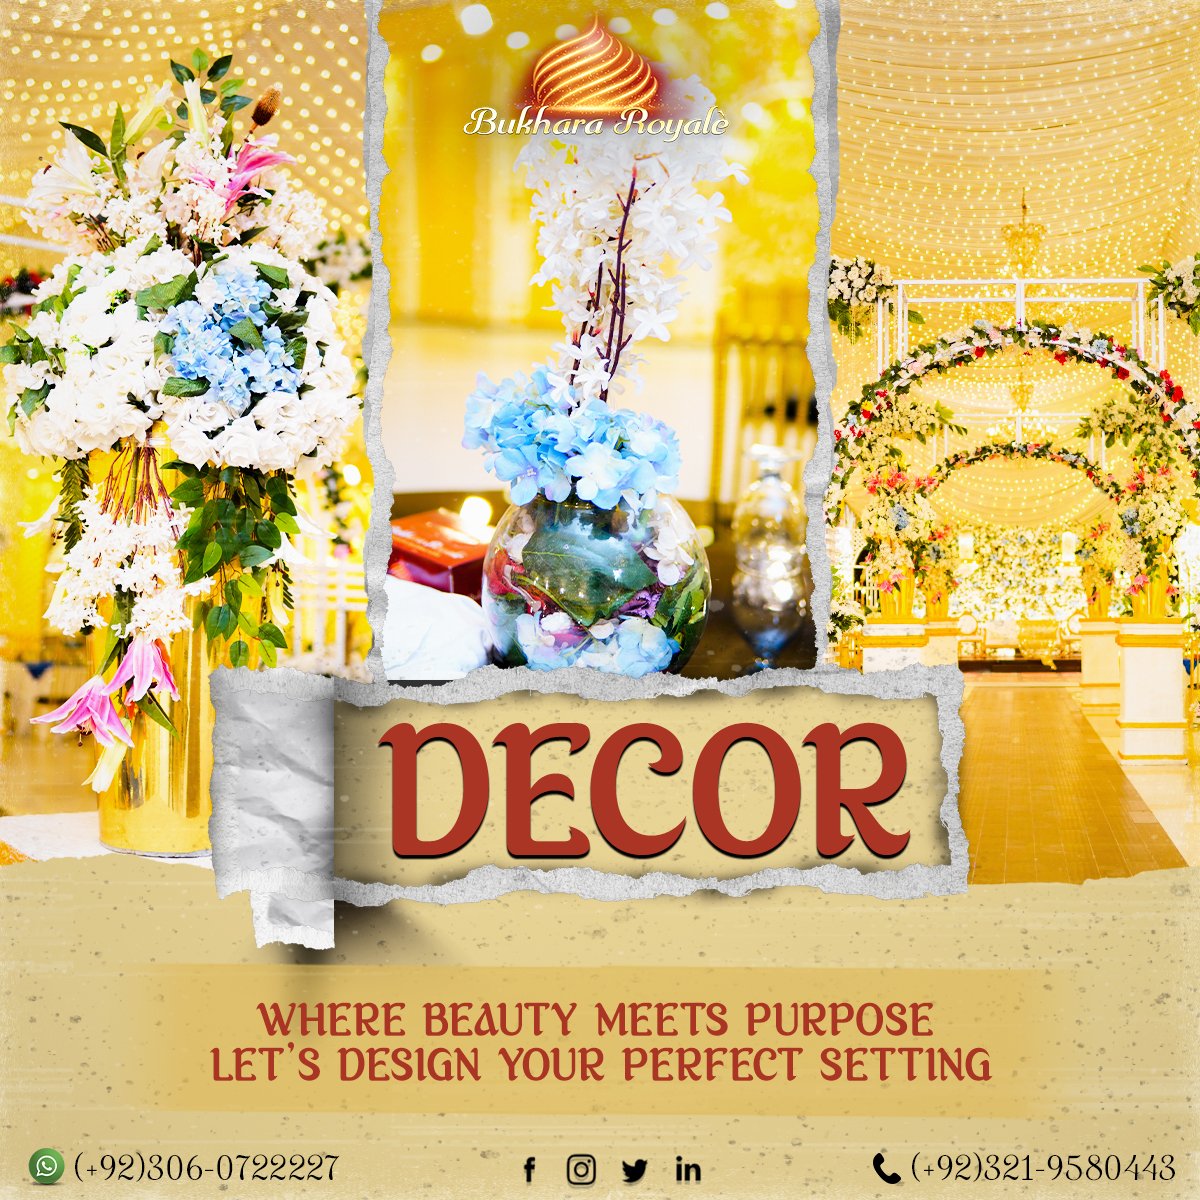 Limited time offer, hurry up. Get one before it’s too late!
Call Now: 0321-9580443 | 0306-0722227
Address: Lohi Bhair, near Gulberg Greens
Main Islamabad-Expressway, Islamabad, Pakistan.
#weddingdecor #photographer #couple #beauty #style #happy #event #engaged #photoshoot #photo